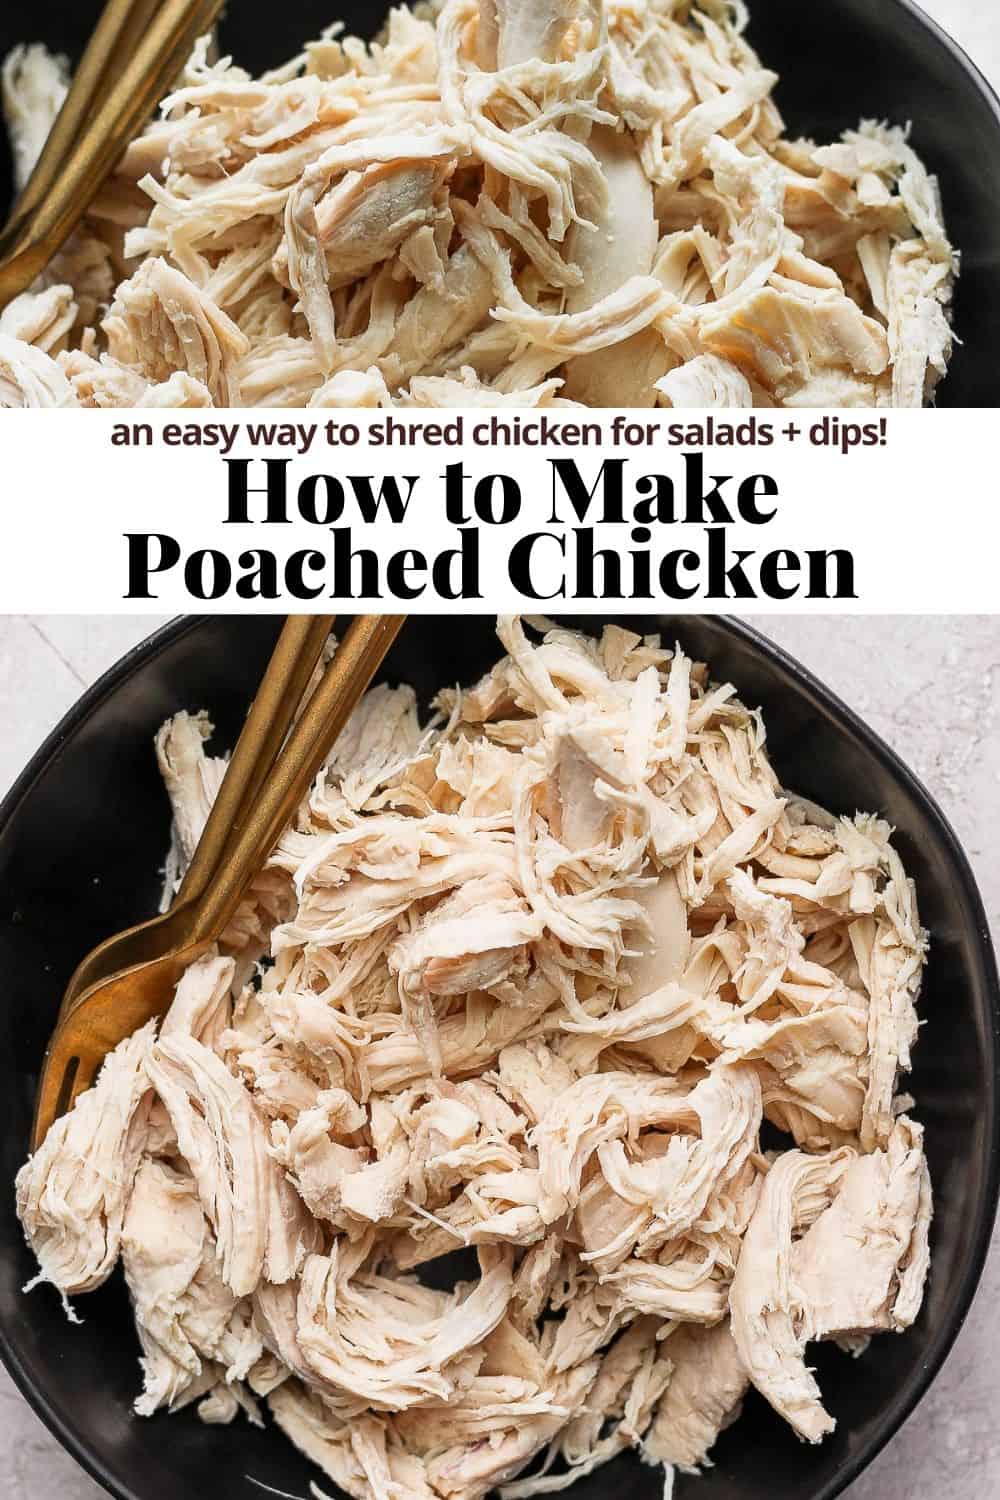 Two images of shredded poached chicken with the text "how to make poached chicken" in the middle.